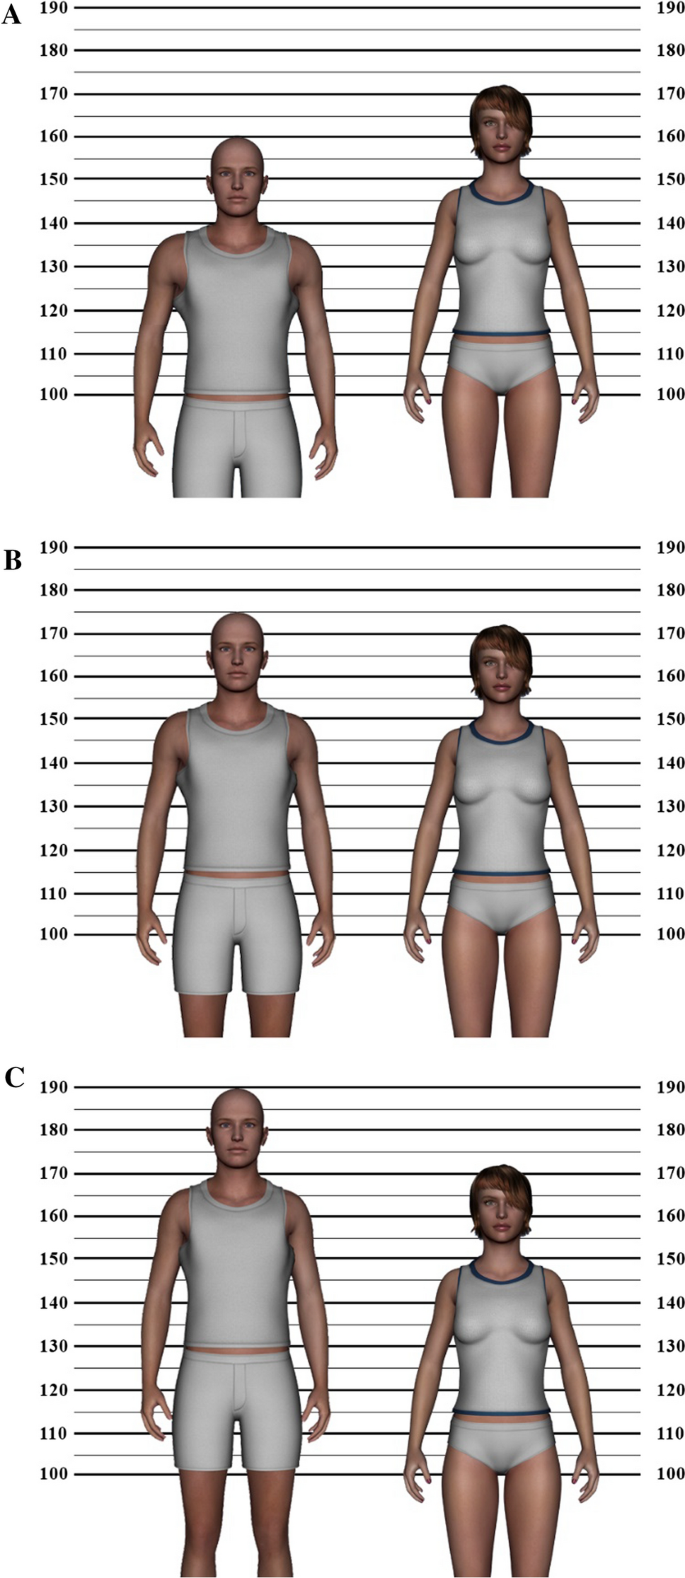 Are broad shoulders more important than Height for attractiveness